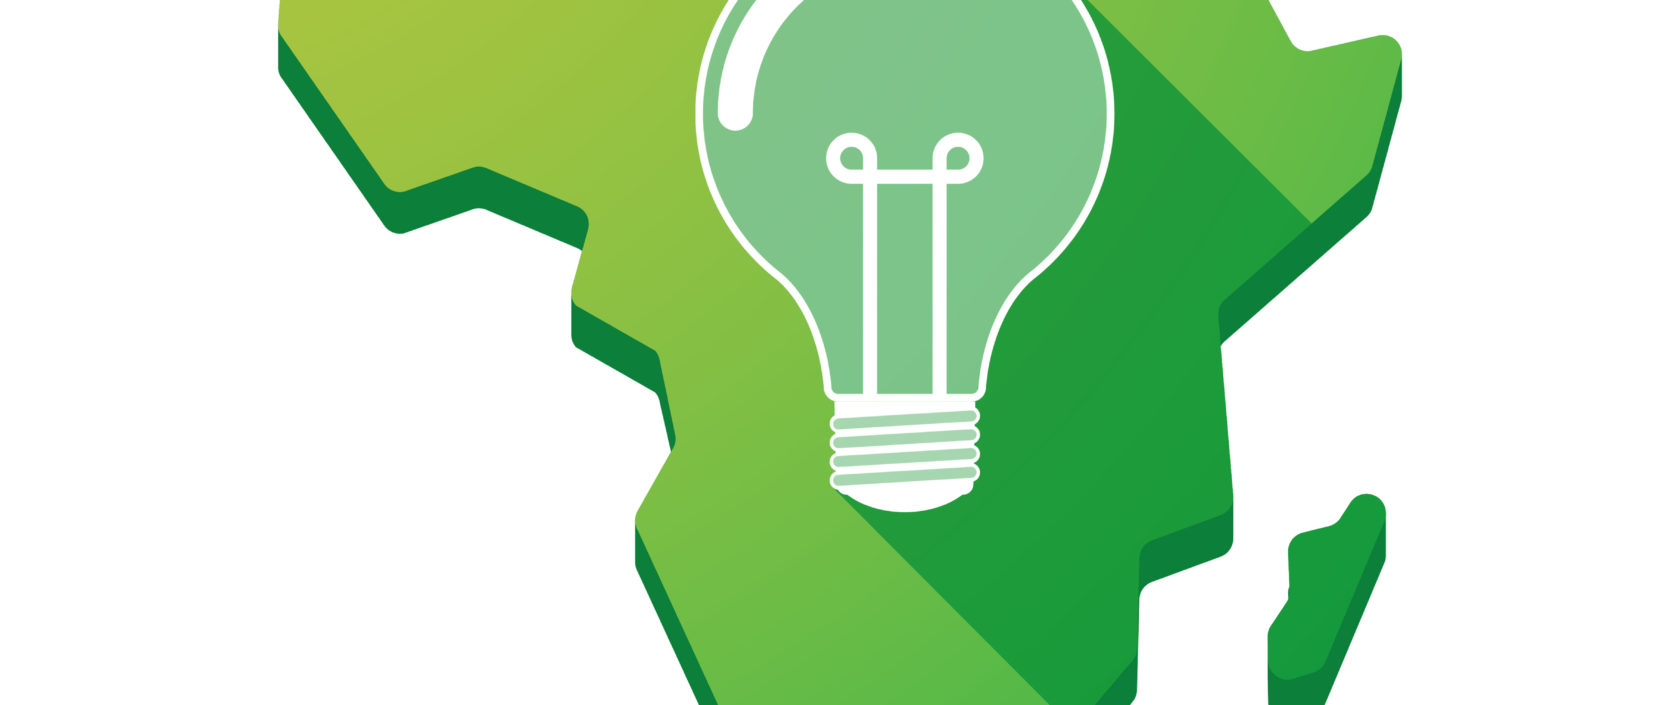 graphic depicting Africa in various shades of green with a light bulb in the center